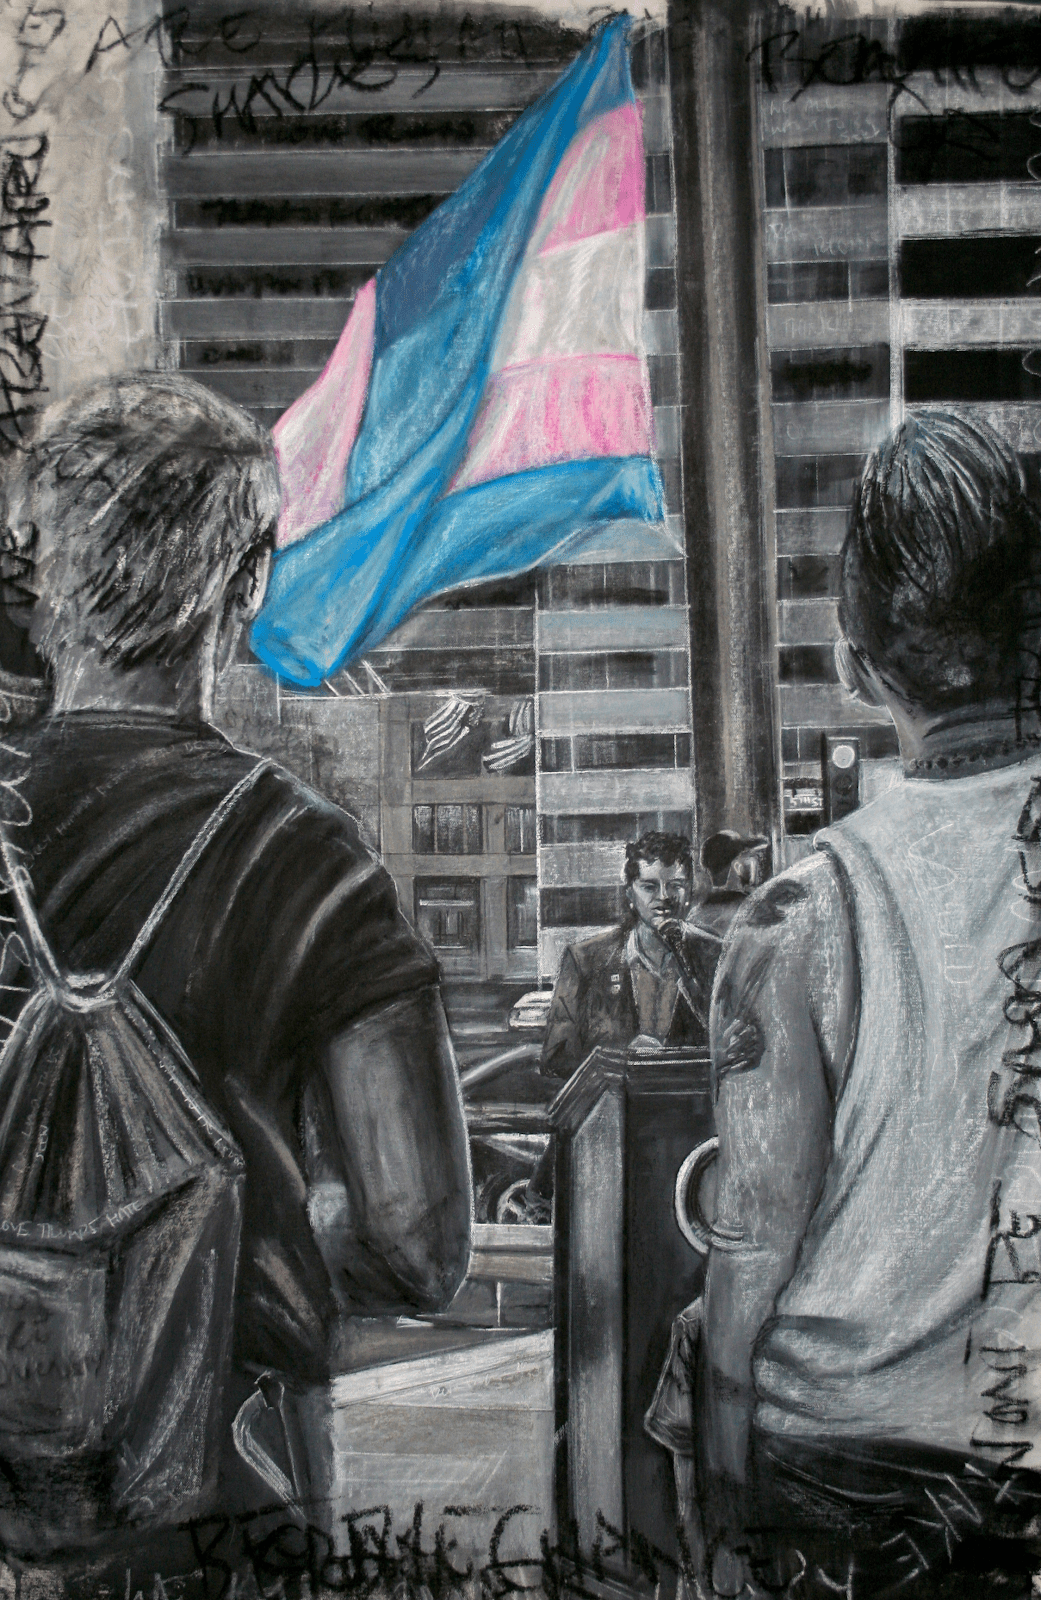 'For Which it Stands' by Devon Reiffer, 2018. Charcoal and pastel on canvas.